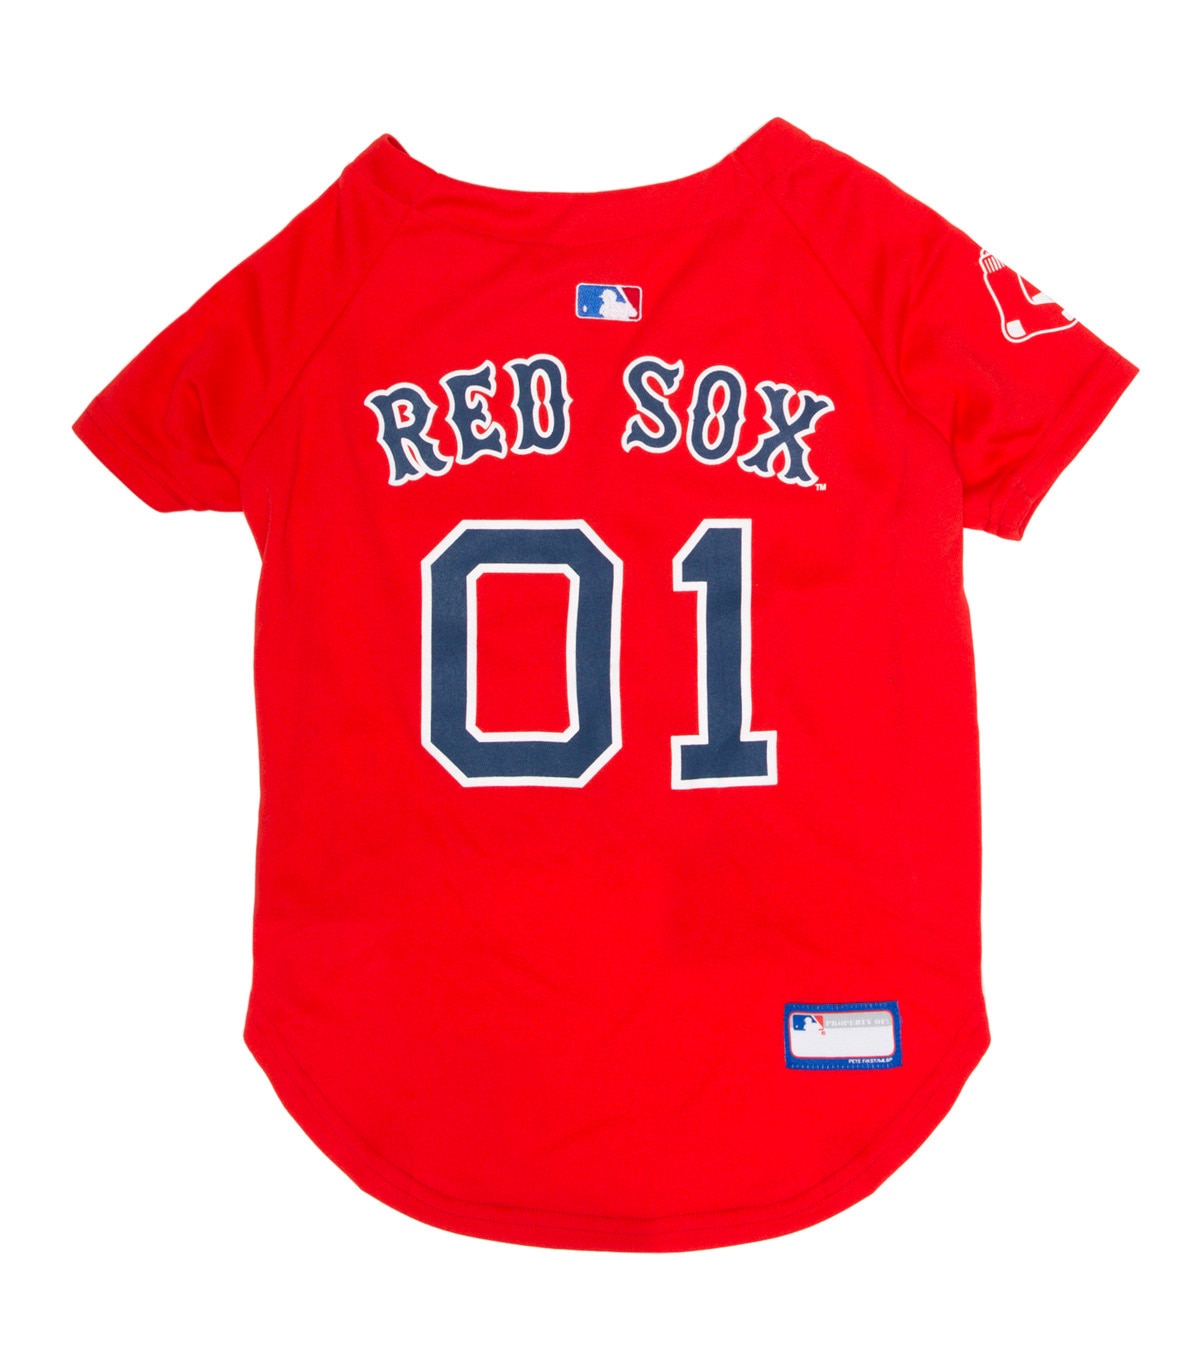 red boston red sox jersey